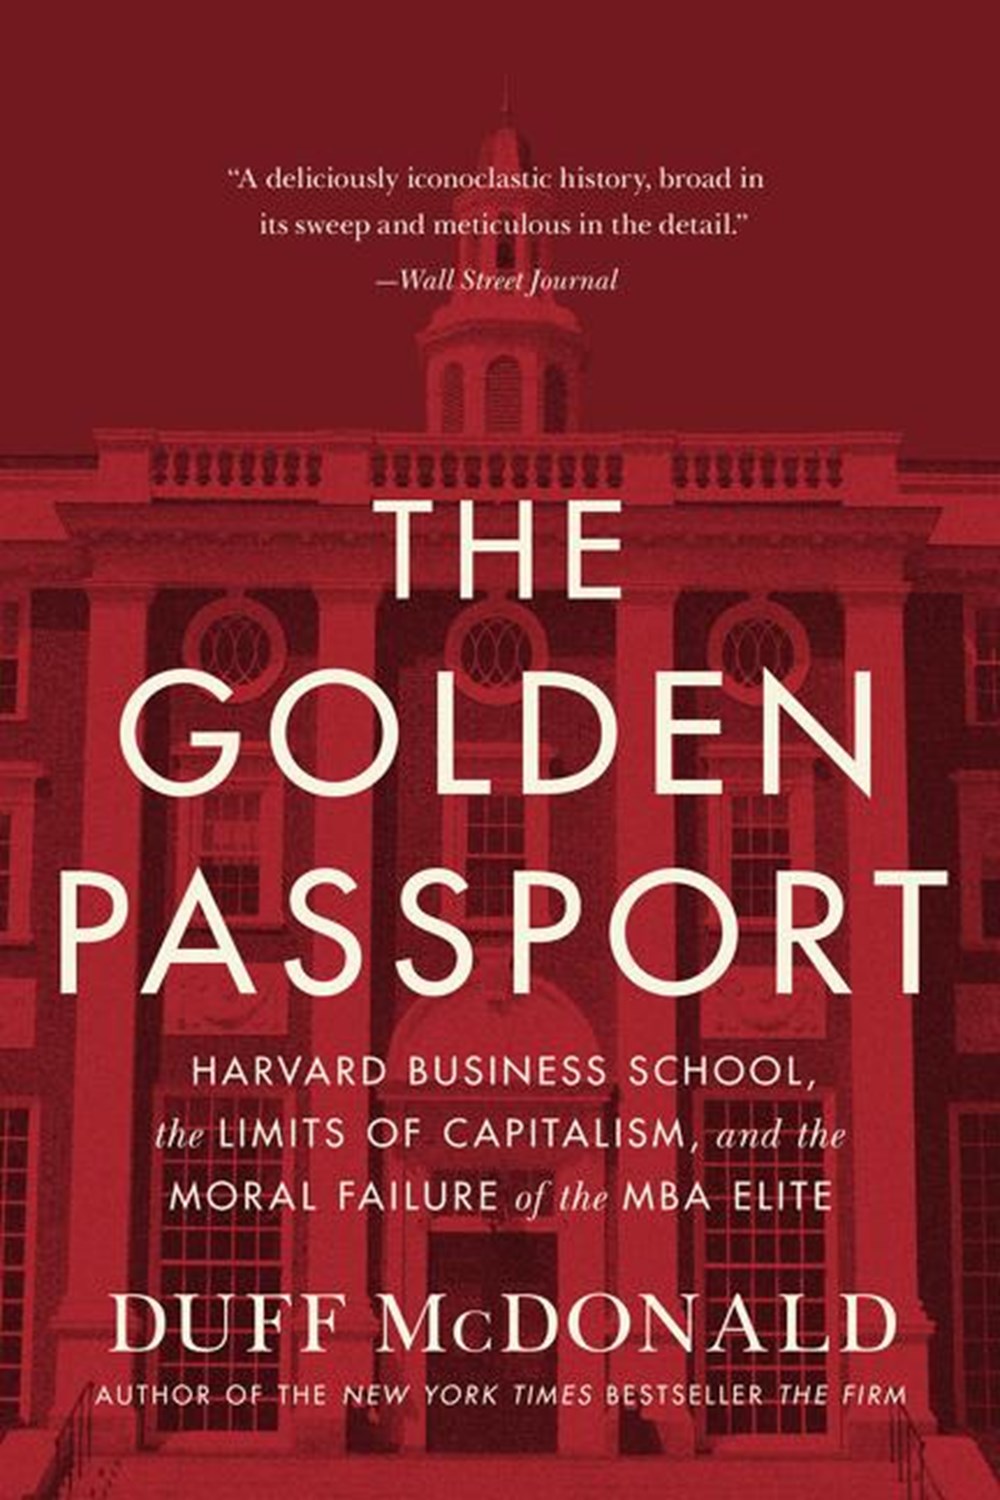 Golden Passport Harvard Business School, the Limits of Capitalism, and the Moral Failure of the MBA 